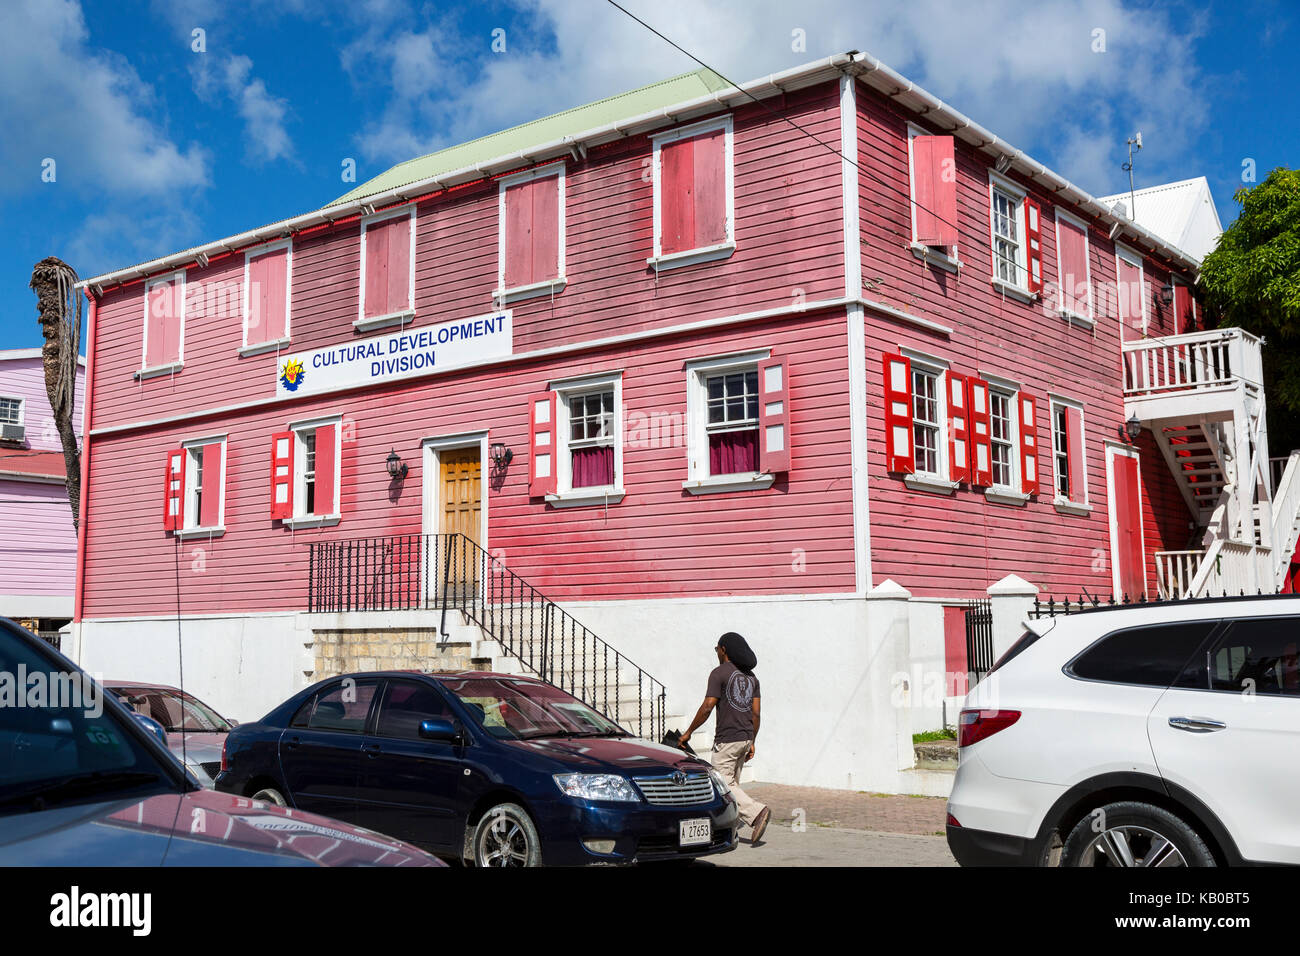 St. Johns, Antigua.  Cultural Development Division, Government Office. Stock Photo